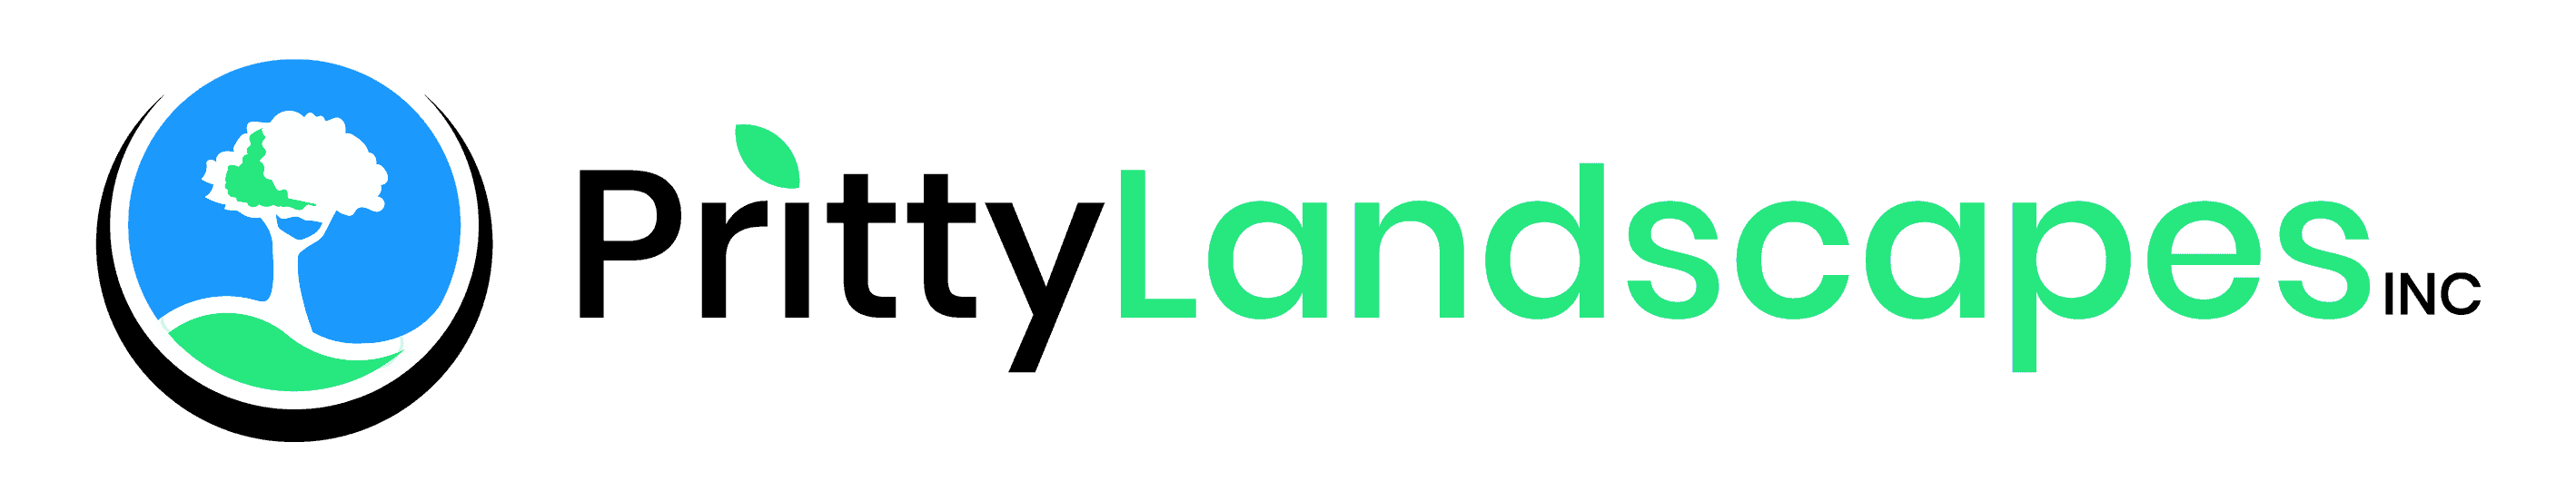 prittylandscapes.com